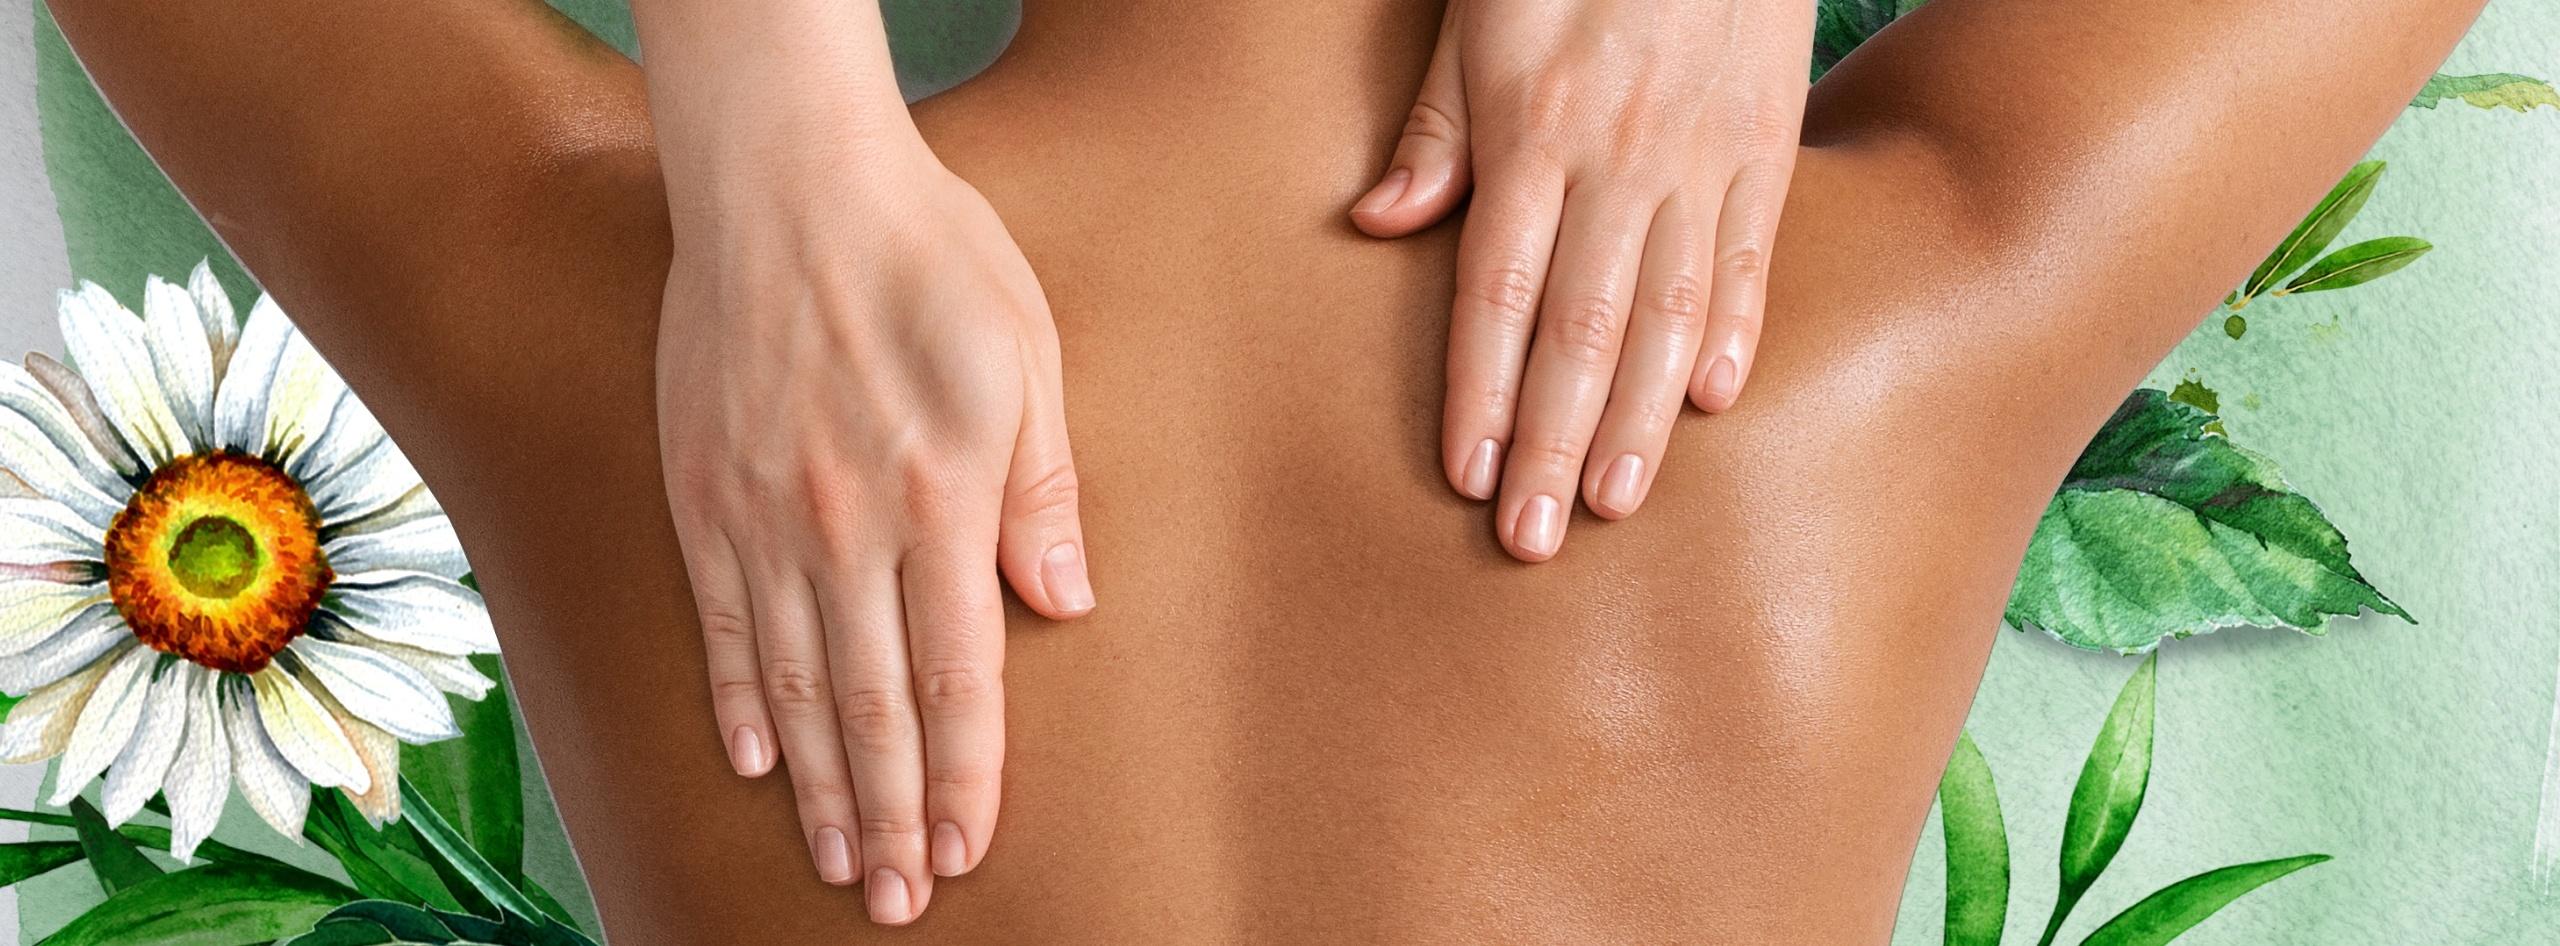 What are the benefits of an aromatherapy massage? 